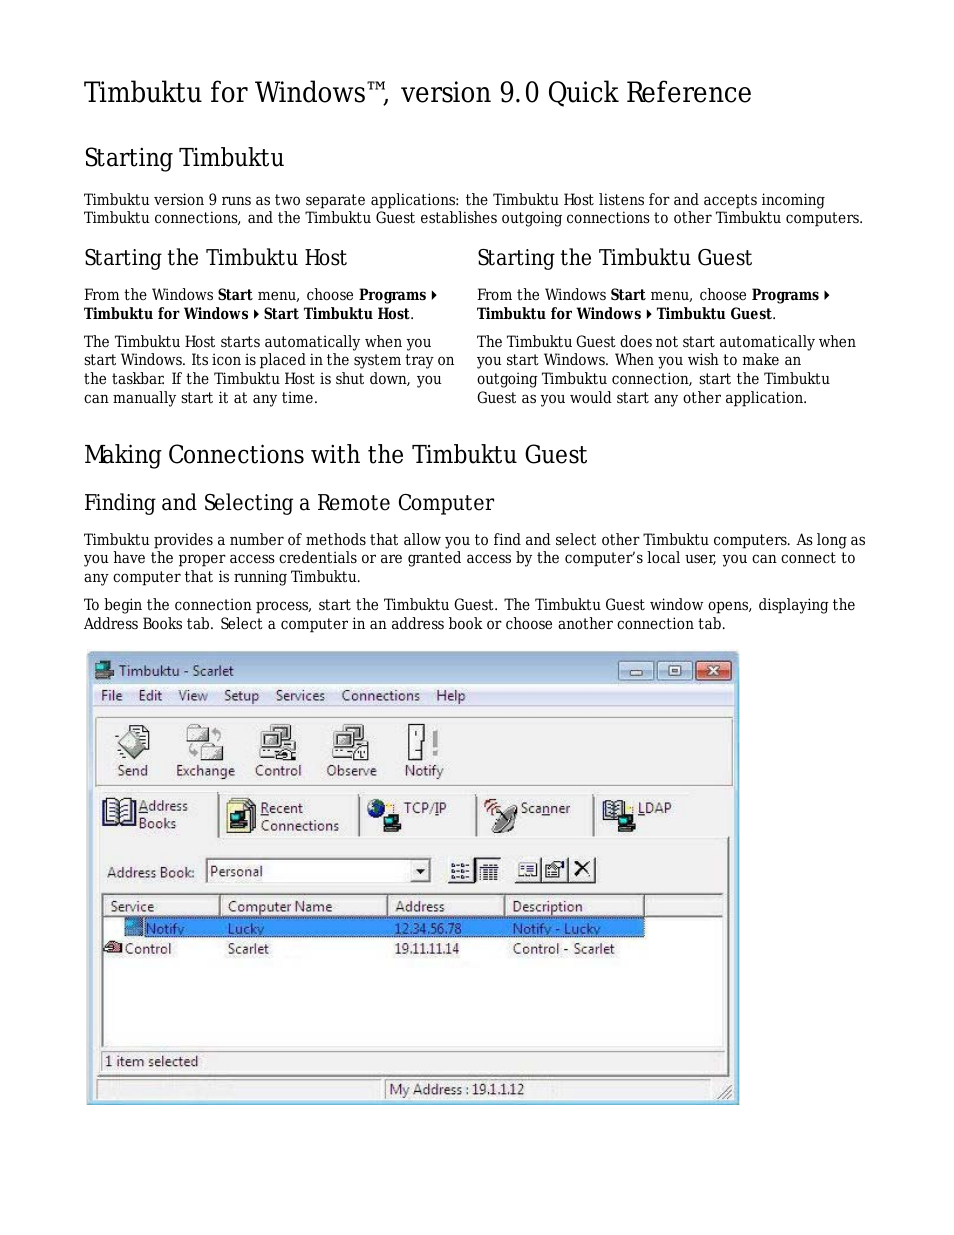 Timbuktu for Windows v9.0.4- At a Glance Guide